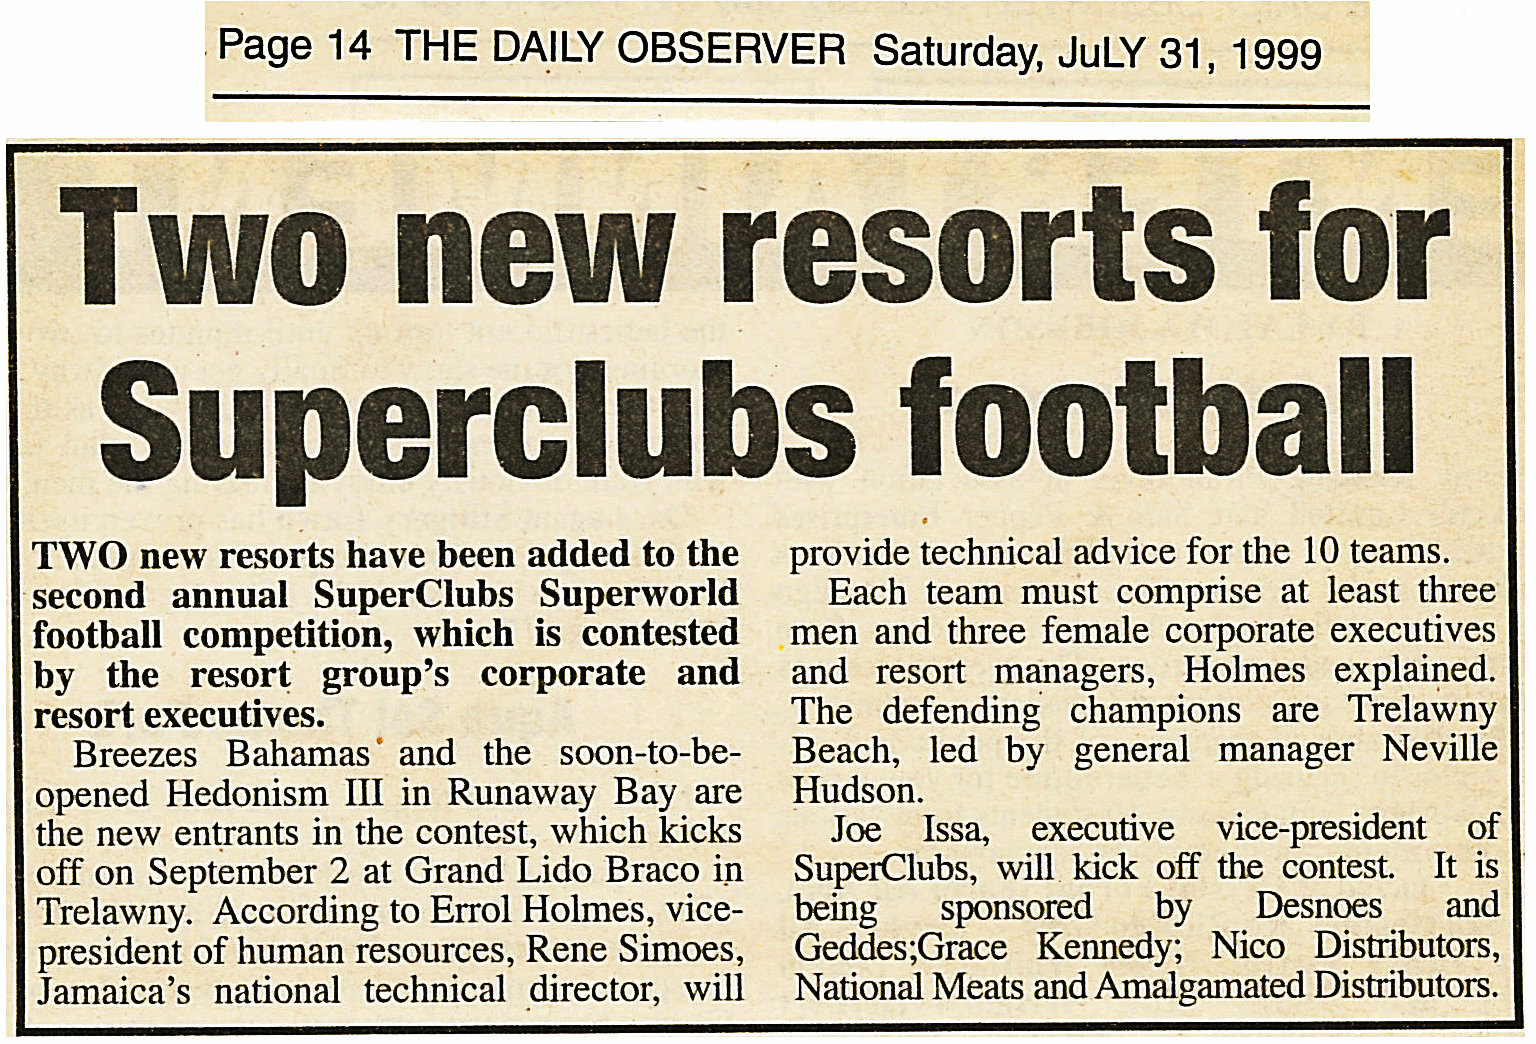 Two new resorts for SuperClubs football 